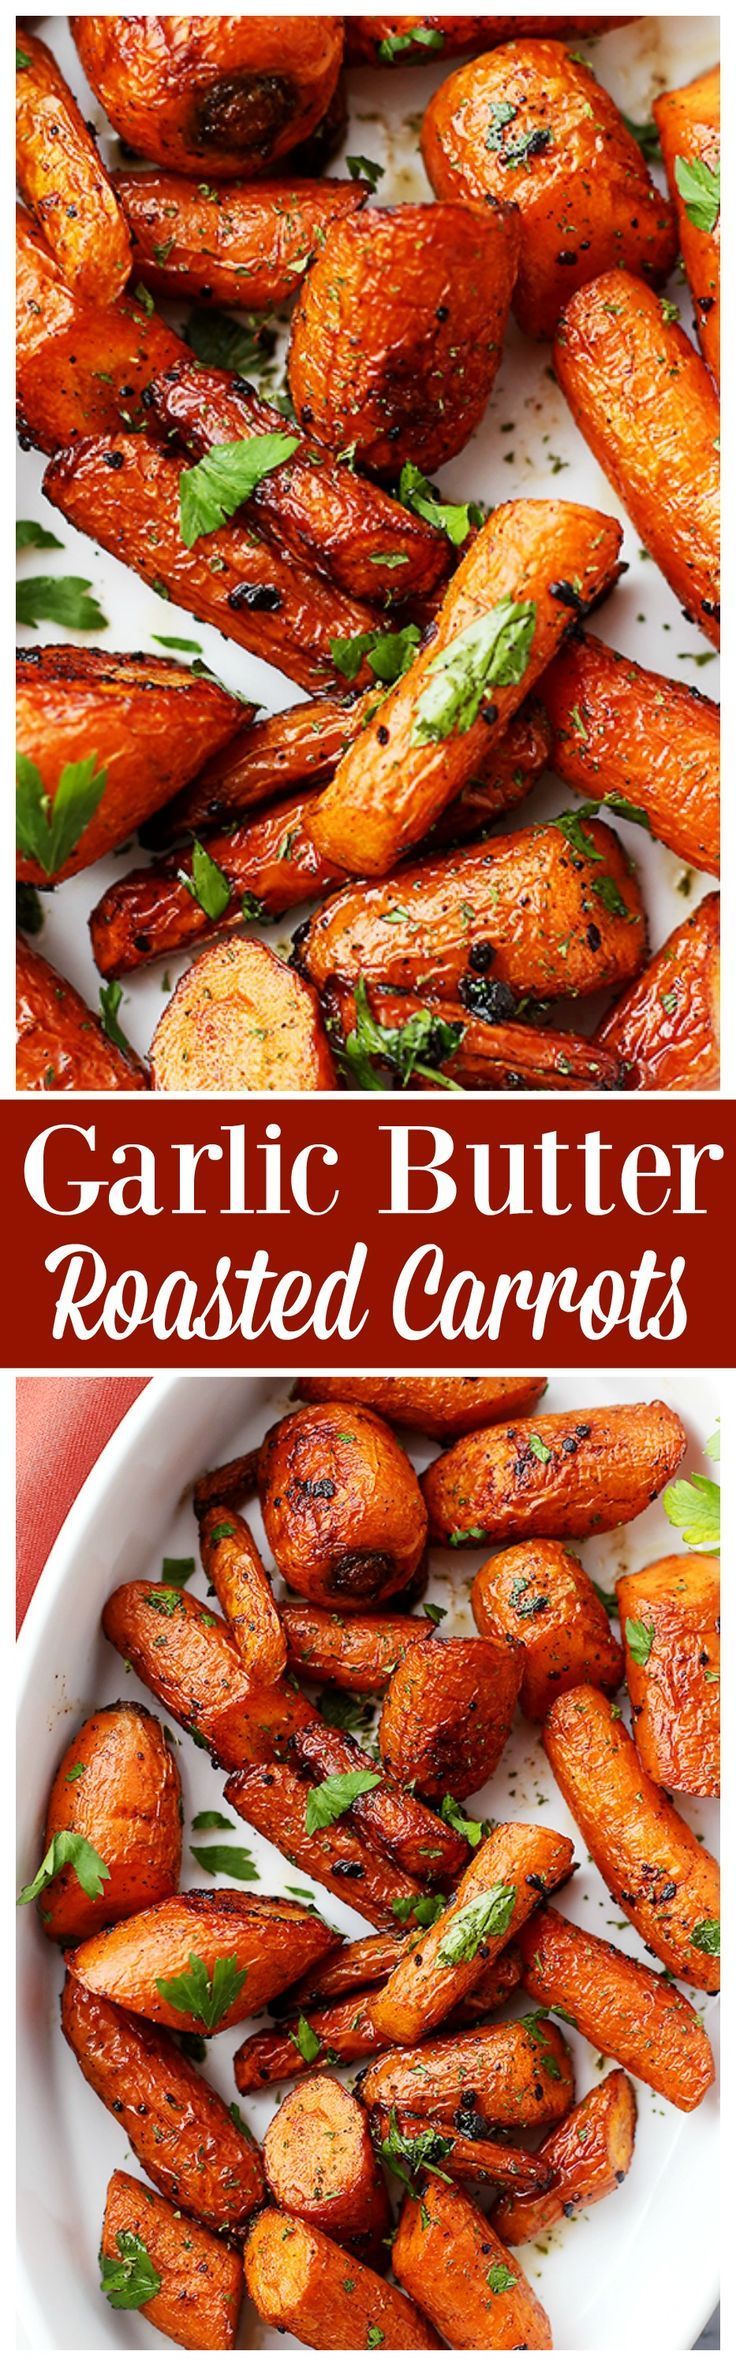 Garlic Butter Roasted Carrots - Ridiculously easy, yet tender and SO incredibly delicious roasted carrots with garlic butter. -   21 thanksgiving recipes carrots
 ideas